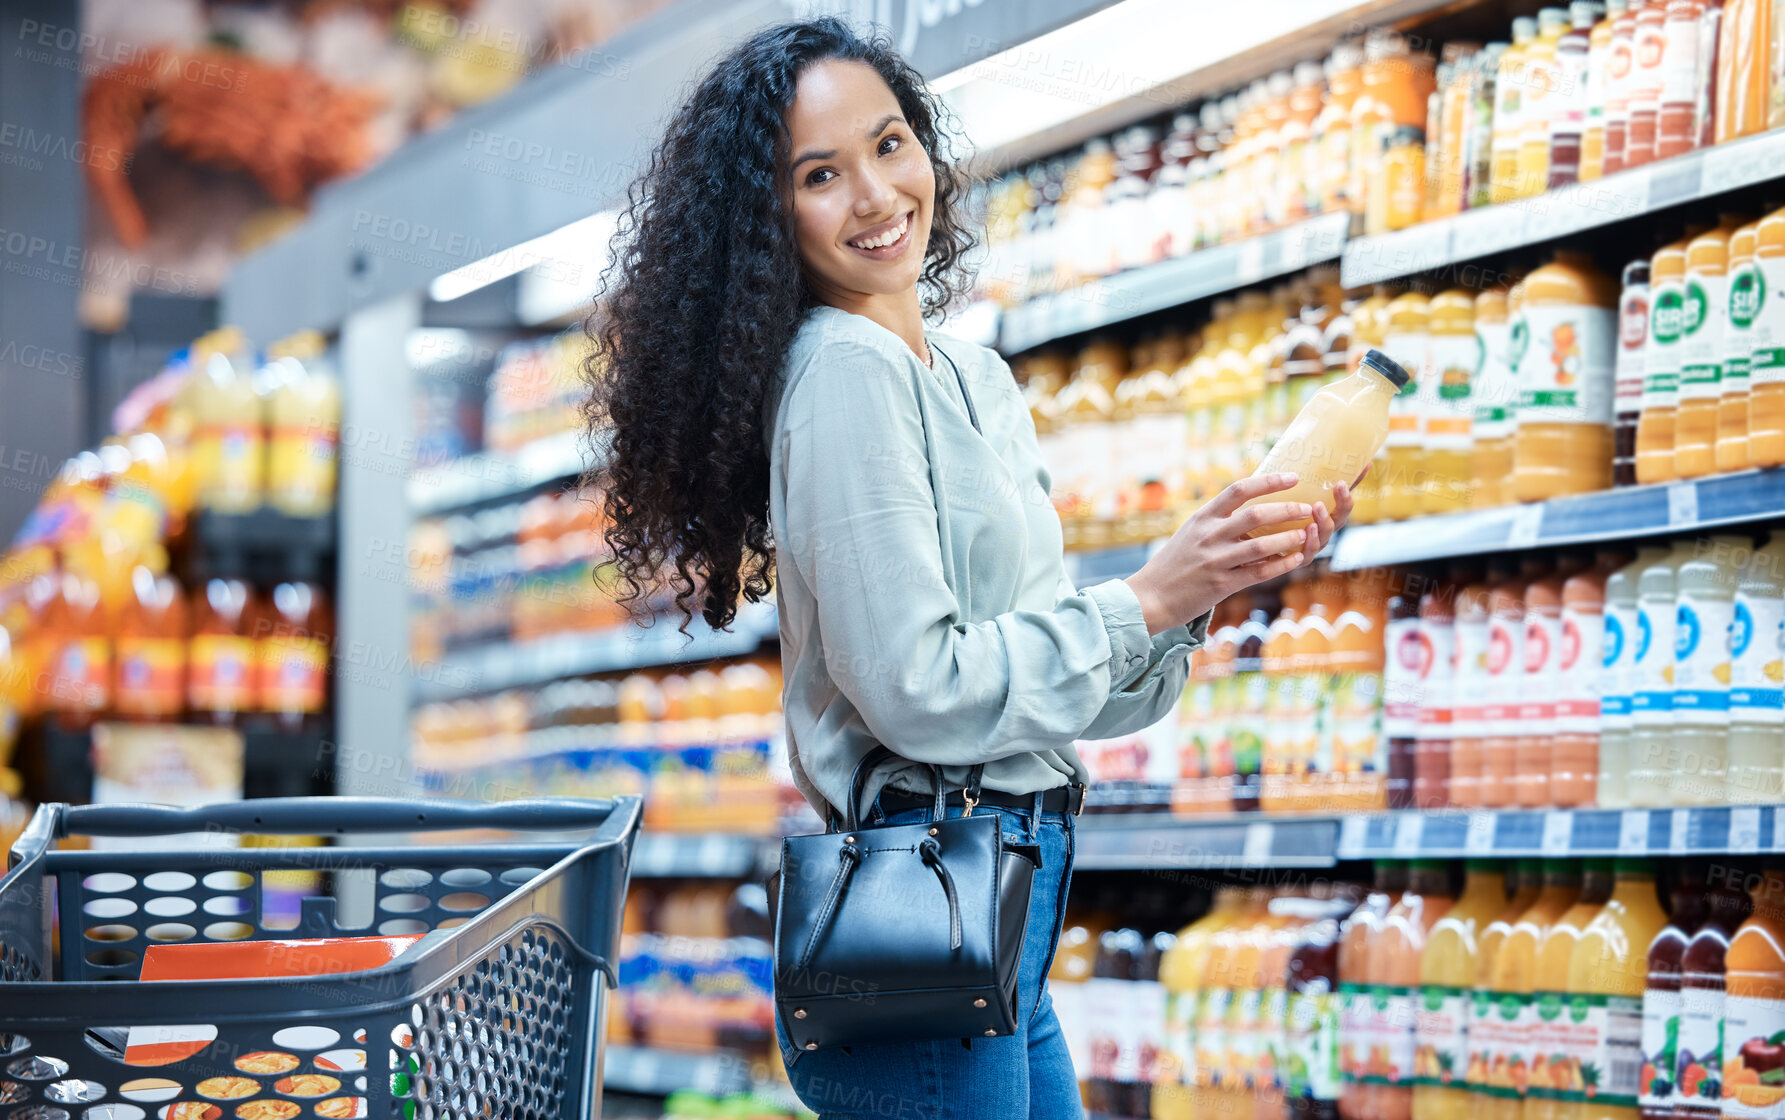 Buy stock photo Portrait of a woman with juice while shopping in a grocery store with a retail product sale. Happy customer with a wellness, health and diet lifestyle buying healthy groceries at a supermarket.